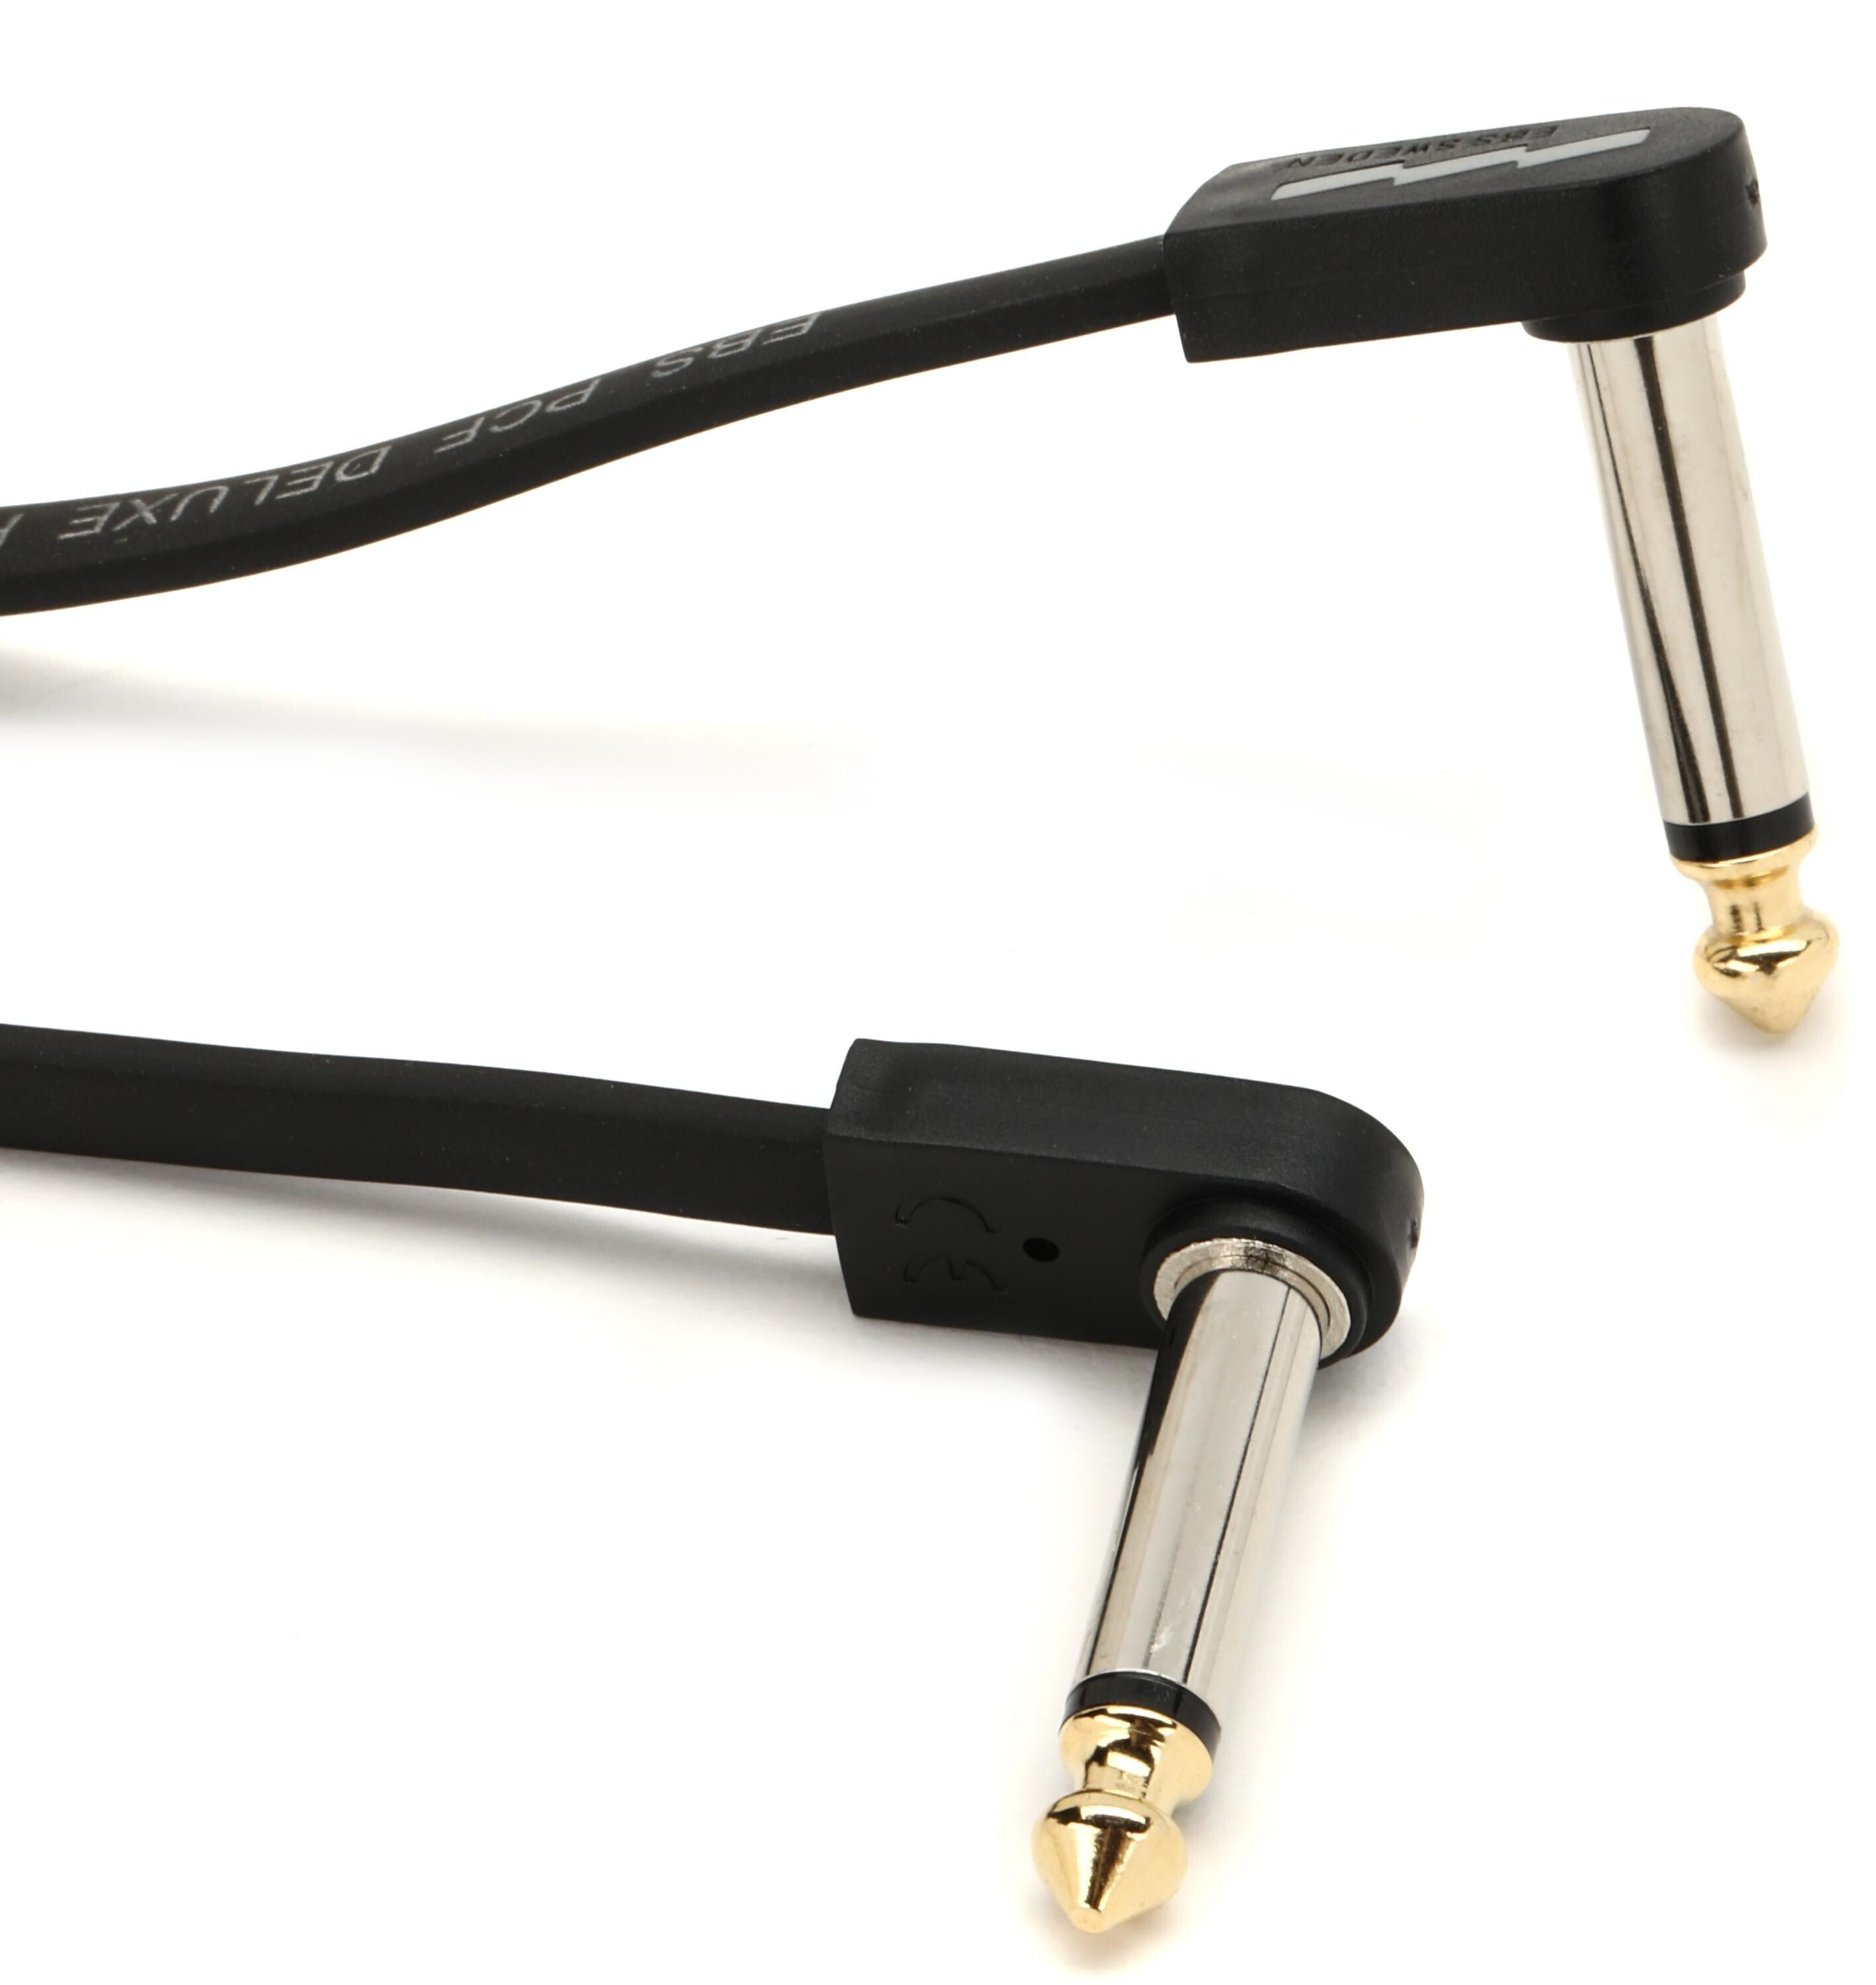 Bundled Item: EBS PCF-DL58 Deluxe Flat Patch Cable - Right Angle to Right Angle - 22.83 inch